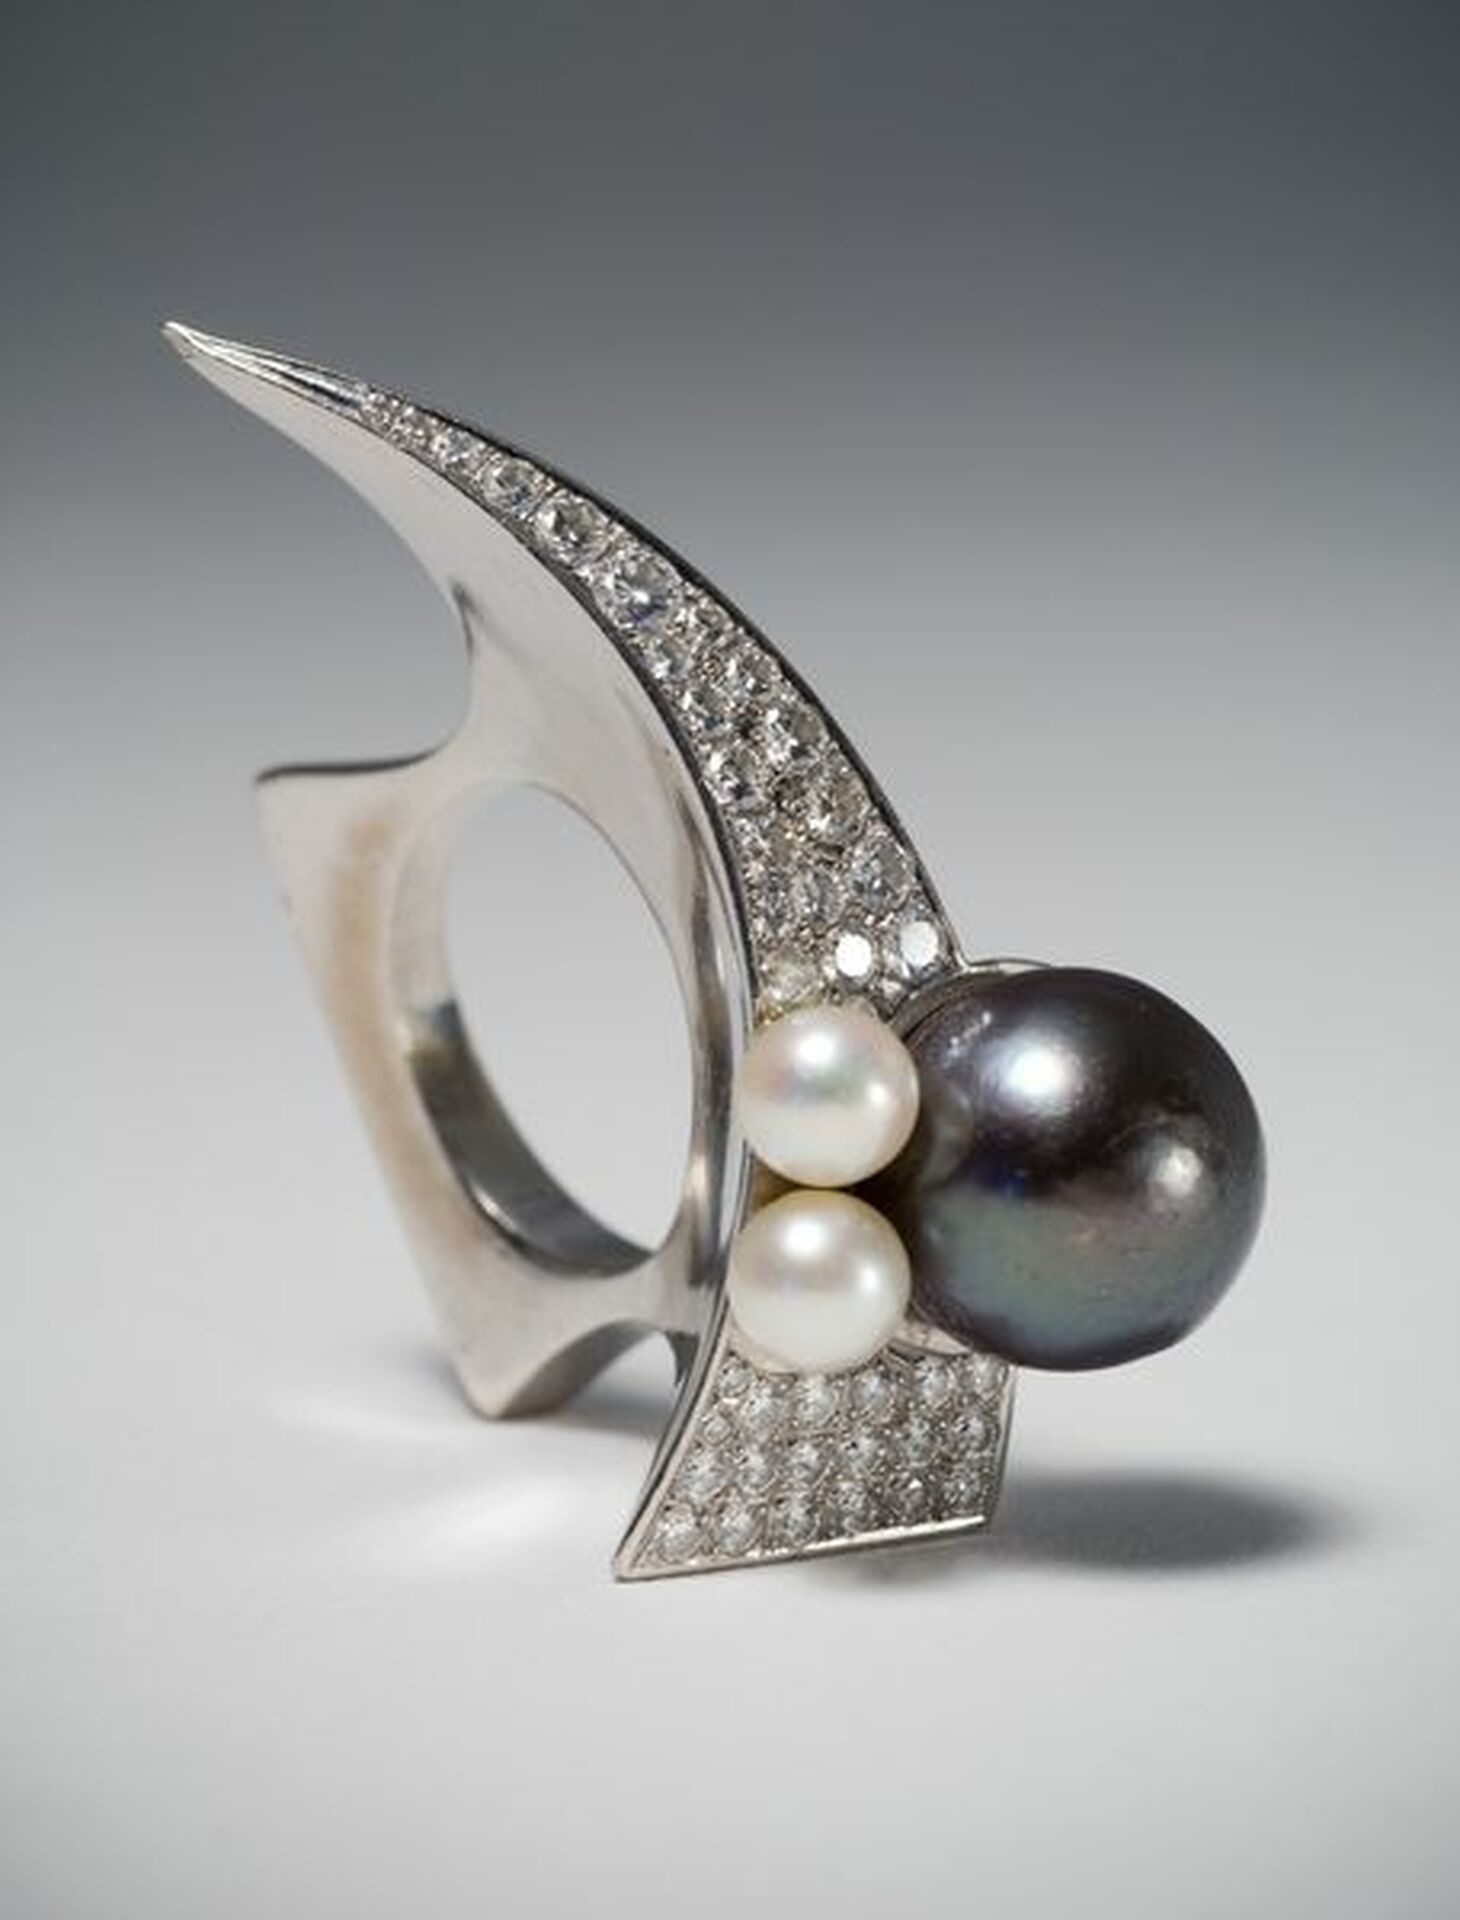 Kristian Nilsson, Ring. Made in 1976. White gold, brilliants, pearls.